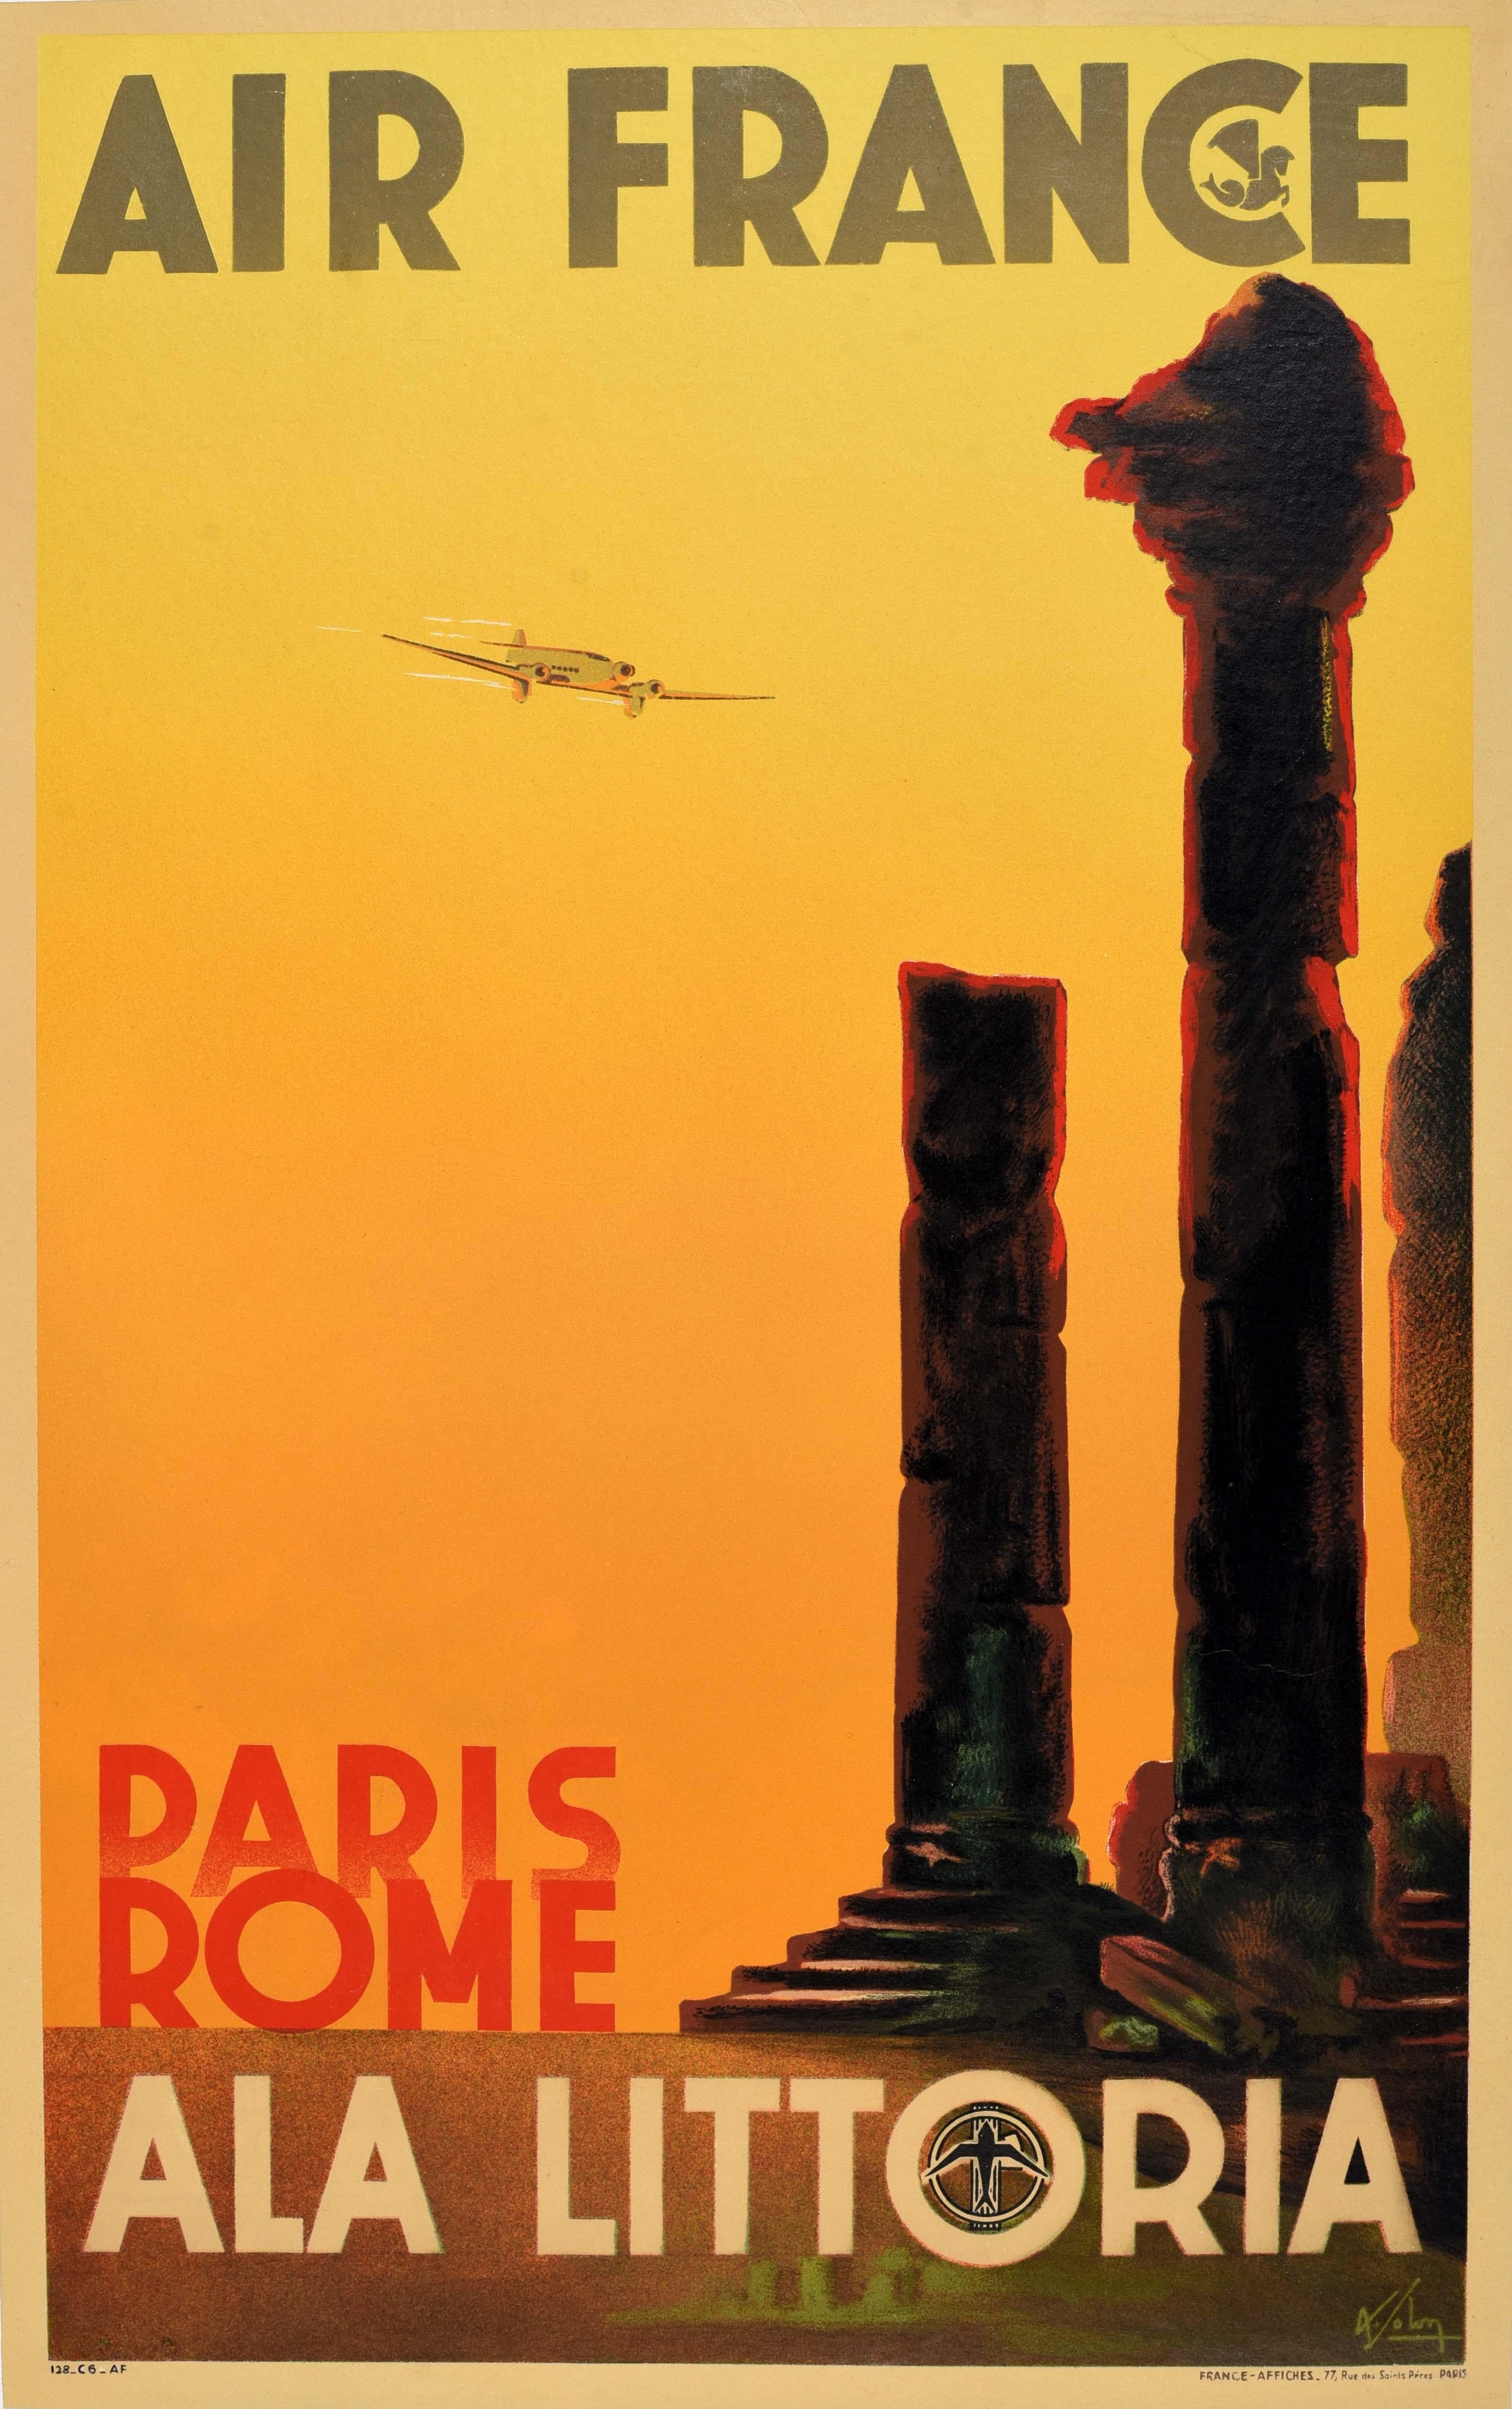 Original vintage travel poster for Air France Paris Rome Ala Littoria featuring a stunning design by Albert Solon (1897-1973) depicting ancient stone pillars standing tall against the orange shaded sky background, a plane flying at speed overhead